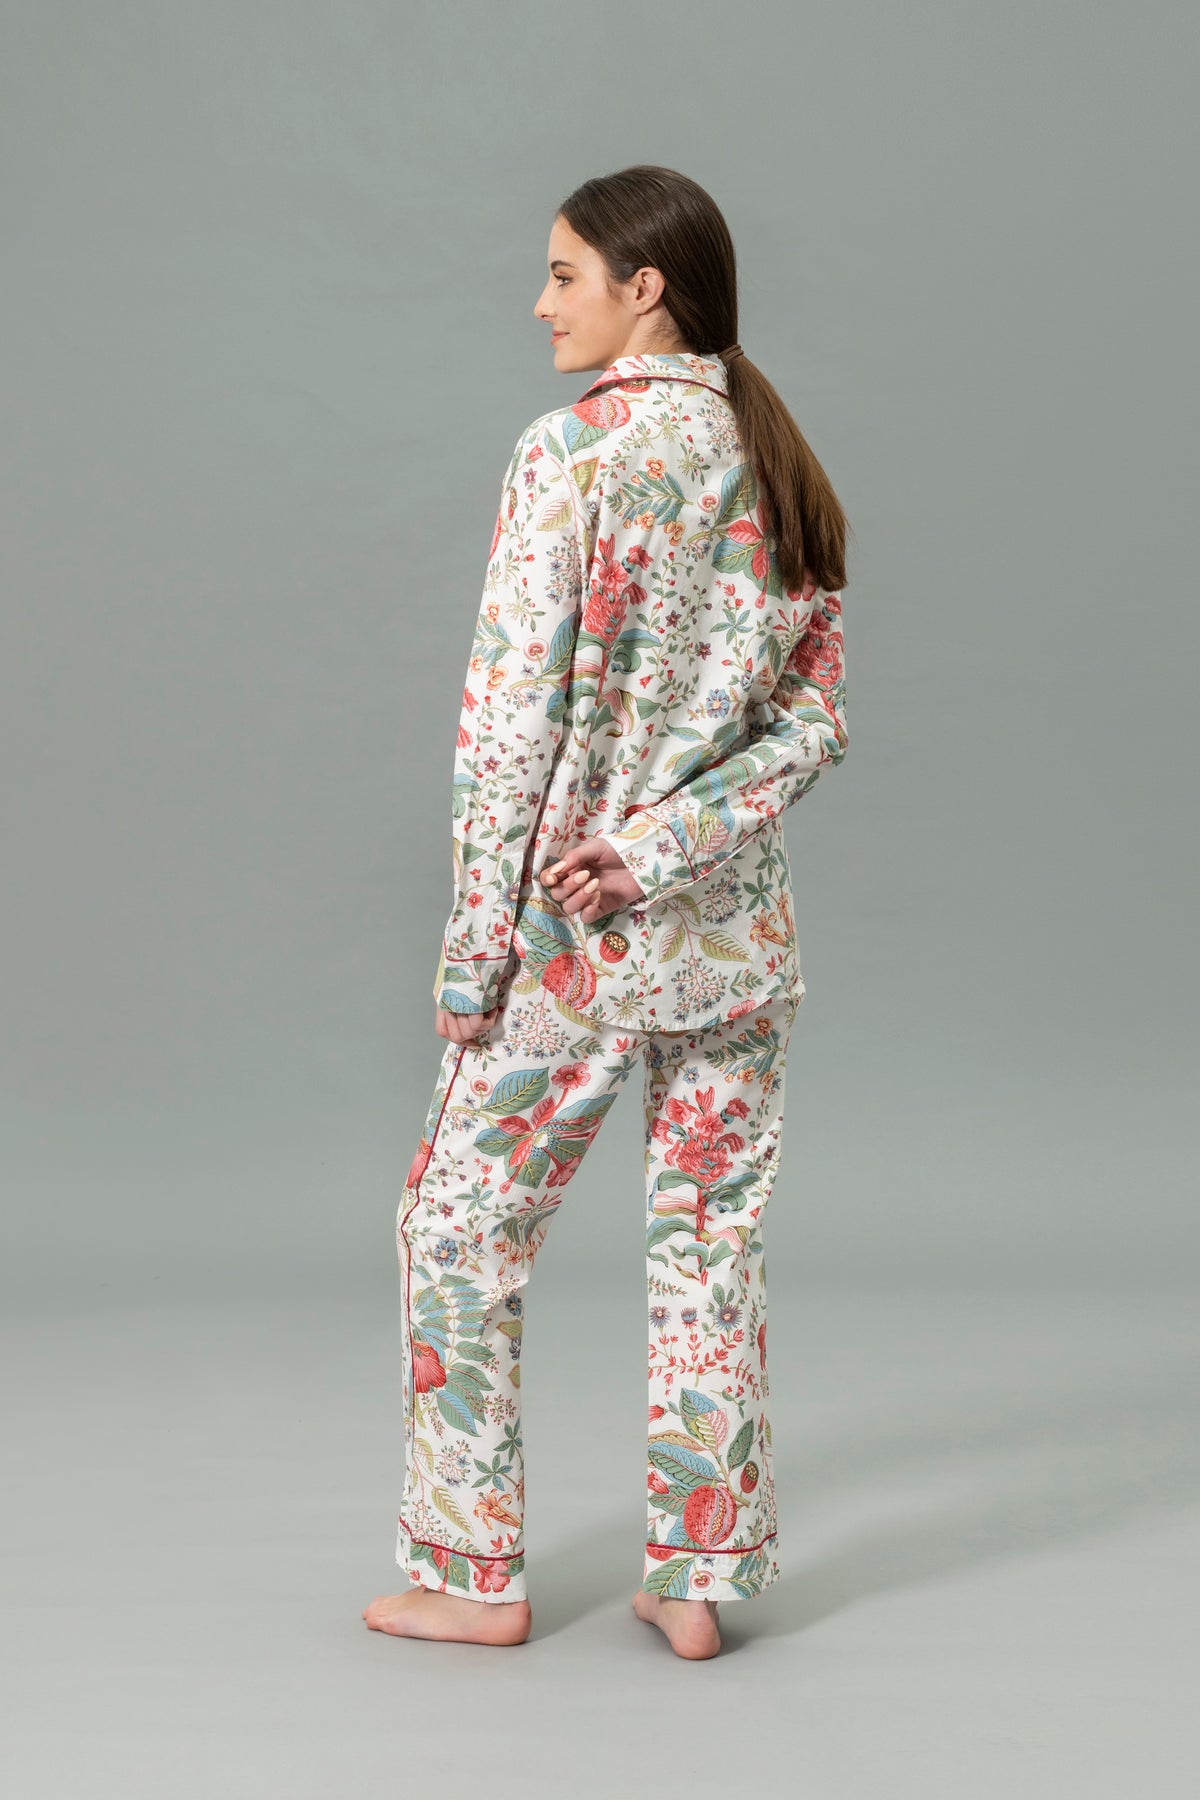 Back View of Model Wearing Matouk Luca Pajama Set in Color Levi Pomegranate Pink Coral